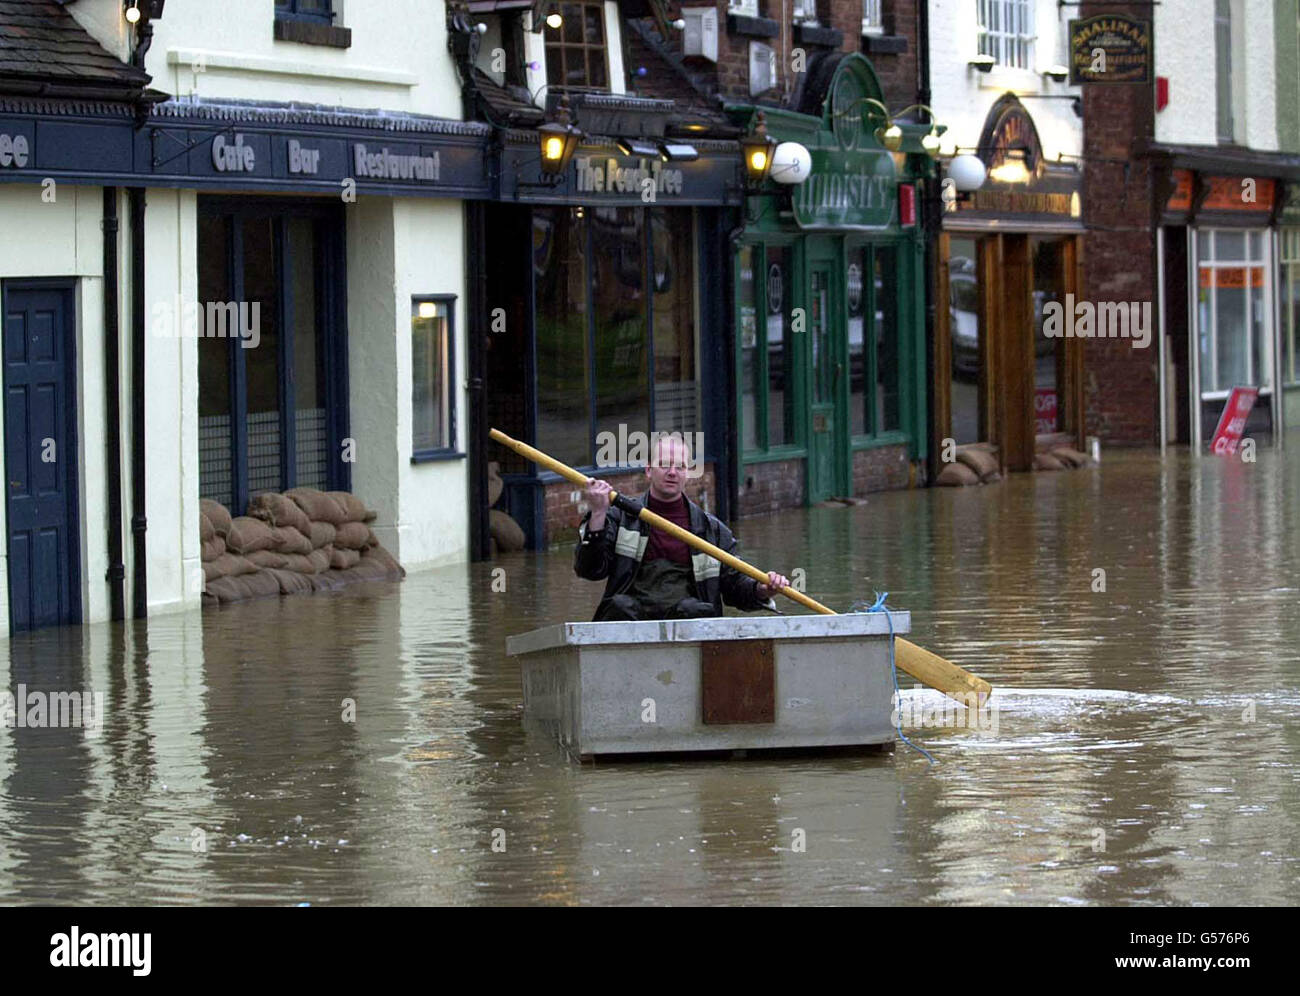 A man in a boat struggles through flood water in central Shrewsbury. The Peach Tree Restaurant, seen left, was flooded again for the third time in six weeks. The restaurant owner, Martin Monahan, has vowed that it will be business as usual despite the flooding. *15/06/04: Two billion people worldwide will be at risk of devastating flooding by 2050 due to climate change, deforestation and rising sea levels, according to a warning issued by experts at the United Nations University. One billion people are estimated to live in the potential path of a 100-year flood. Stock Photo